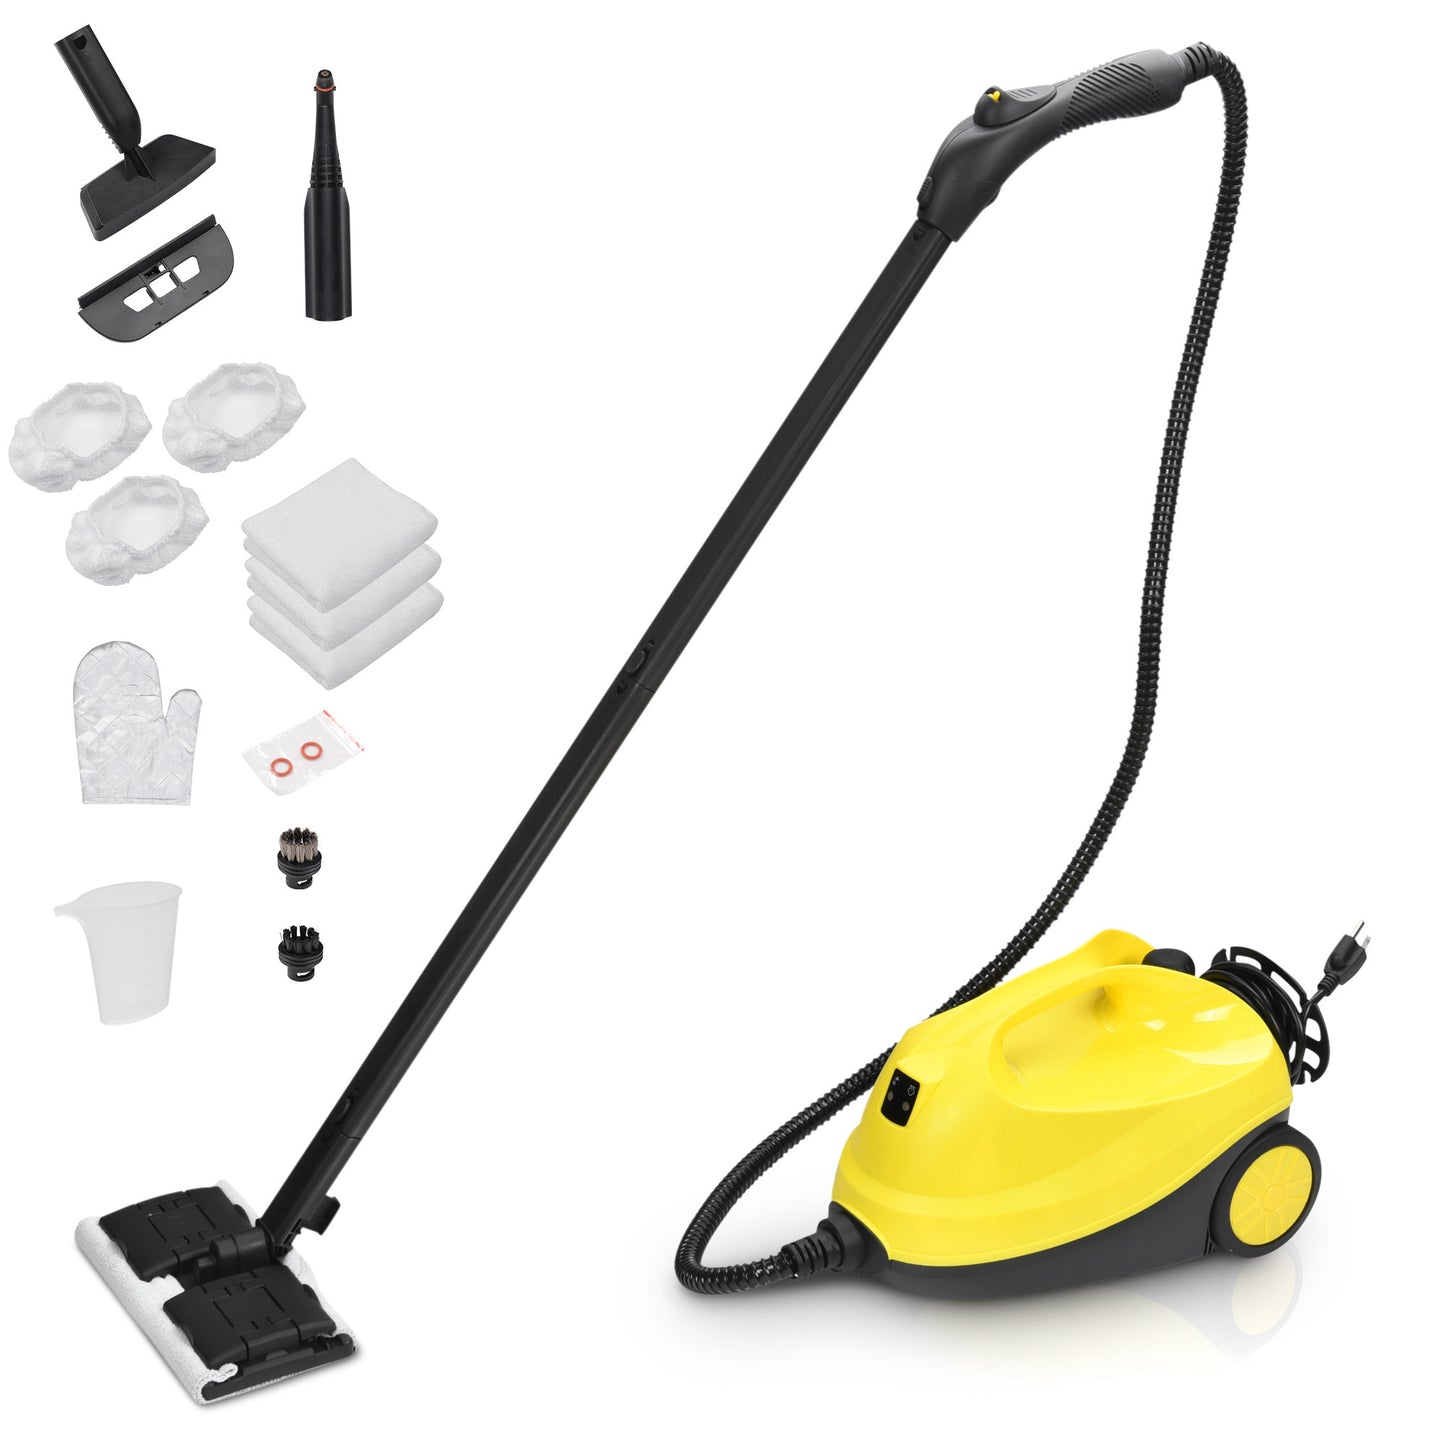 Steam Cleaner 1500W Multifunctional Steam Cleaner features an adjustable button,heating up in 6 mins for continuous steam about 30 mins